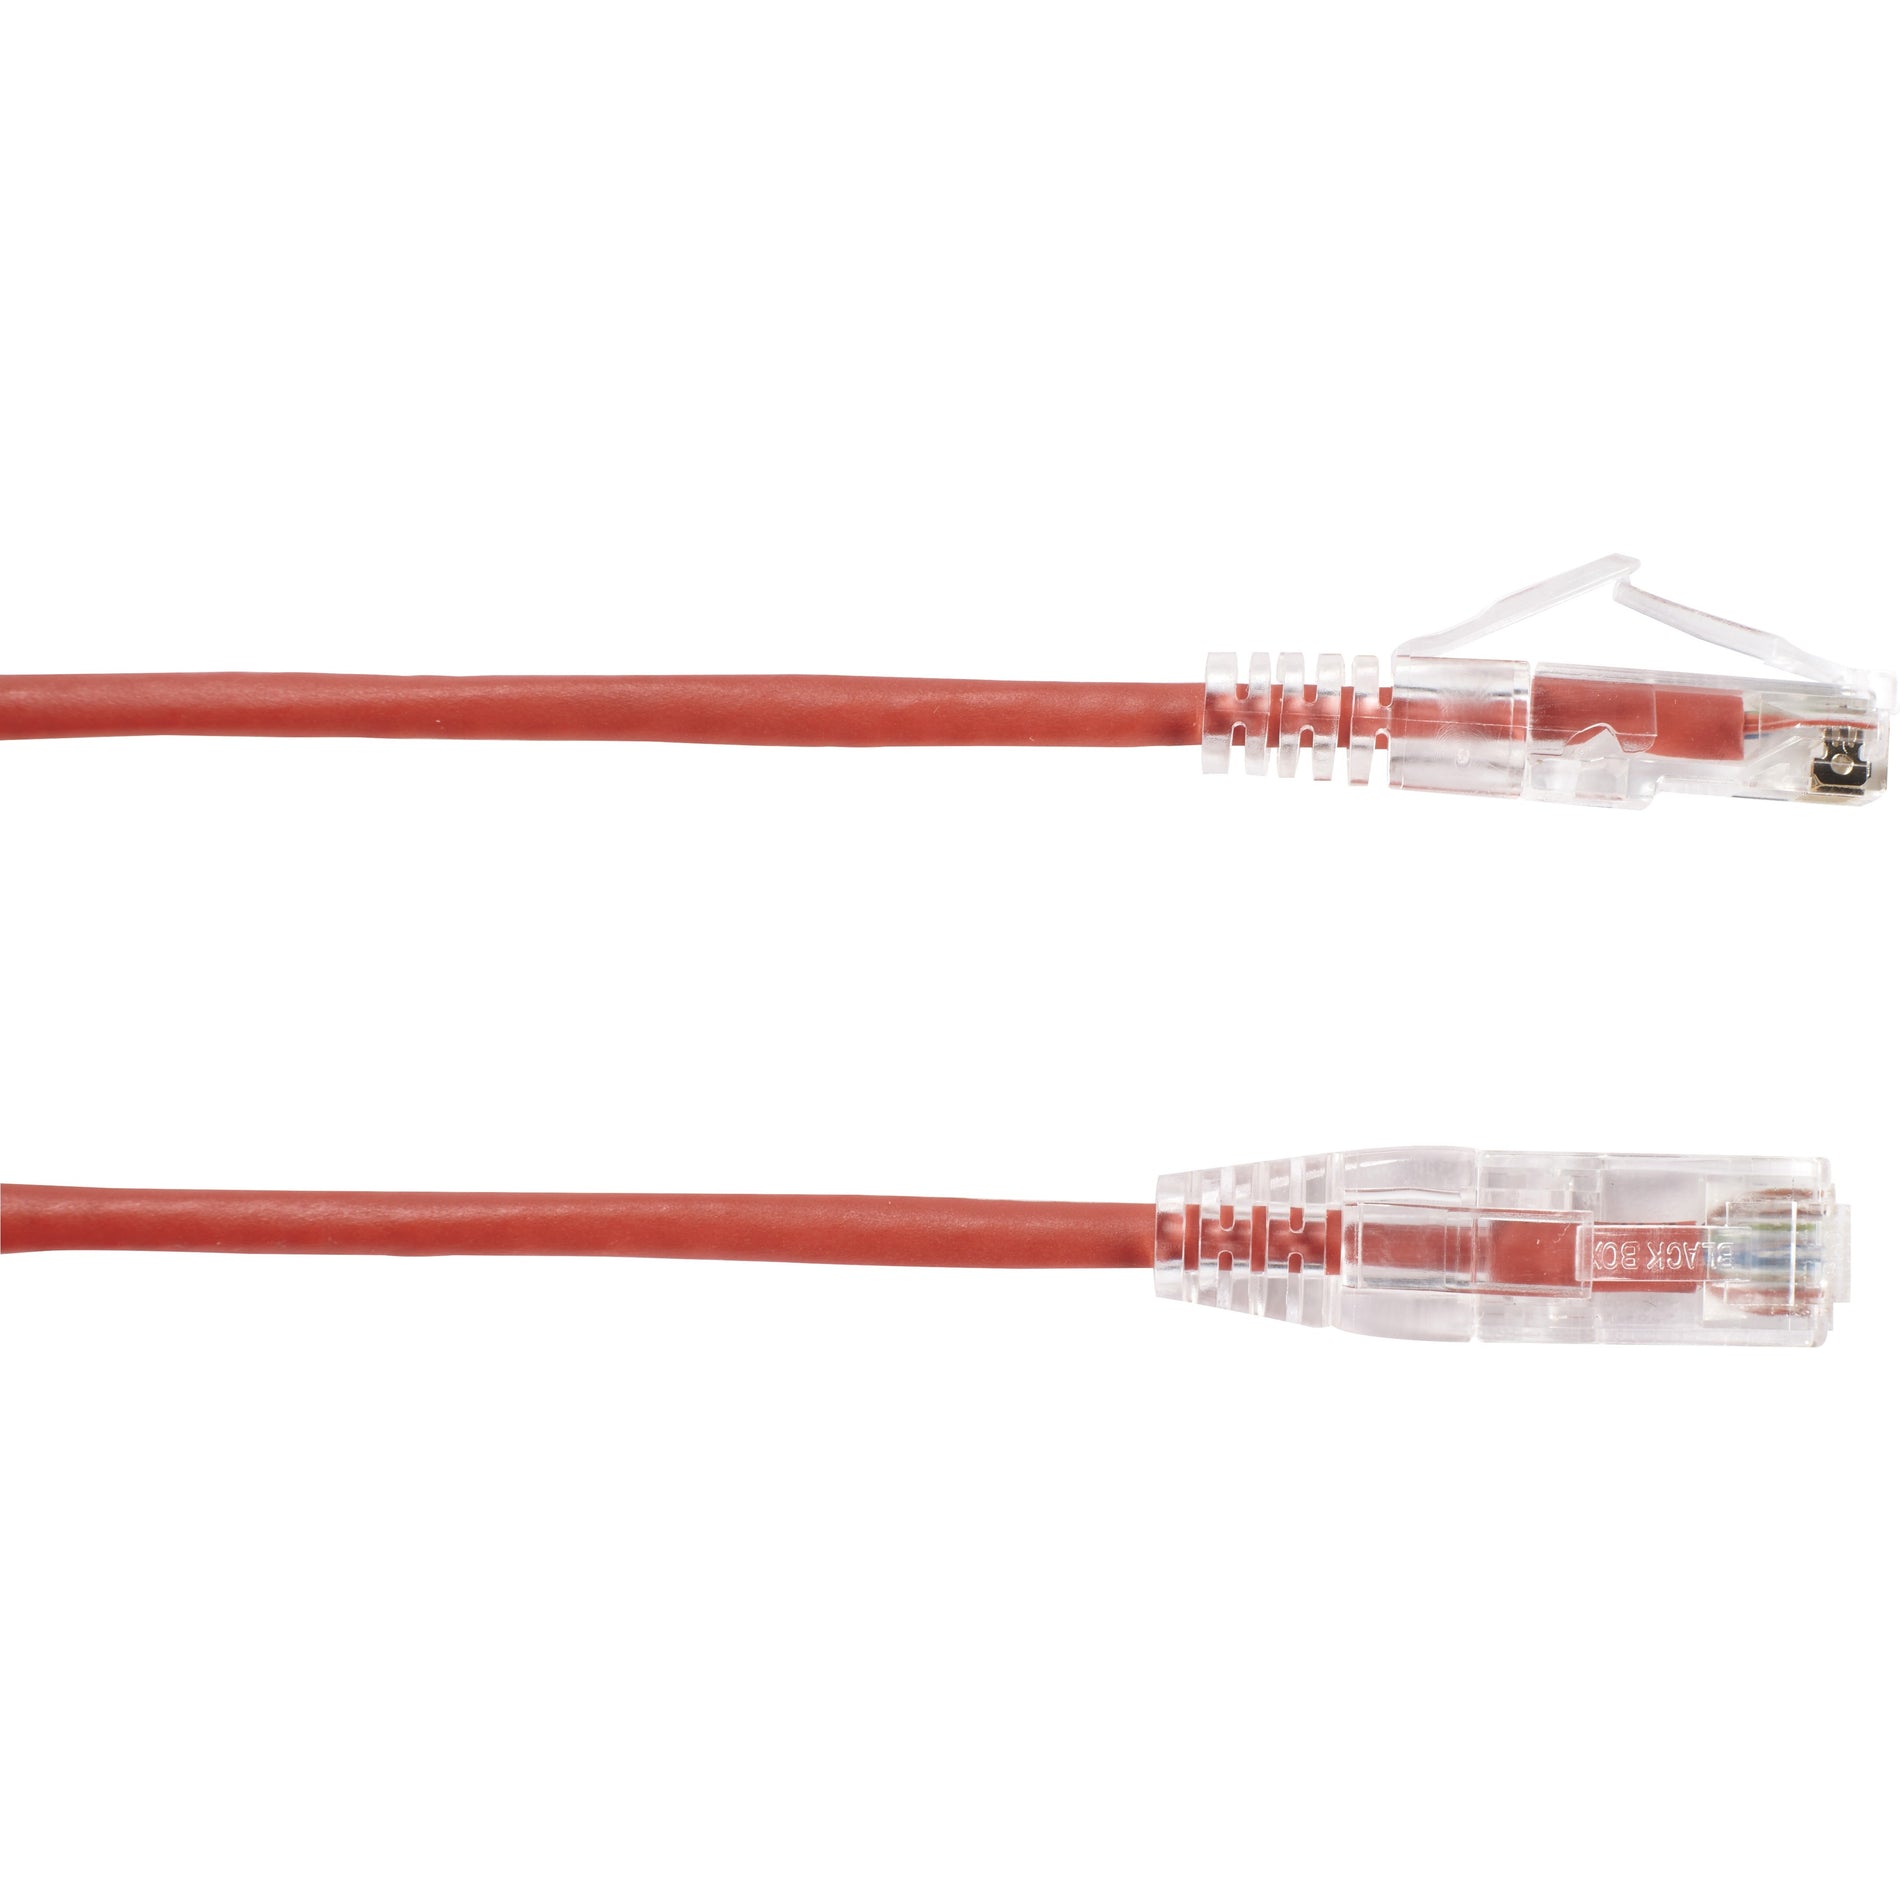 Black Box C6PC28-RD-15 Slim-Net Cat.6 UTP Patch Network Cable, 15 ft, Red